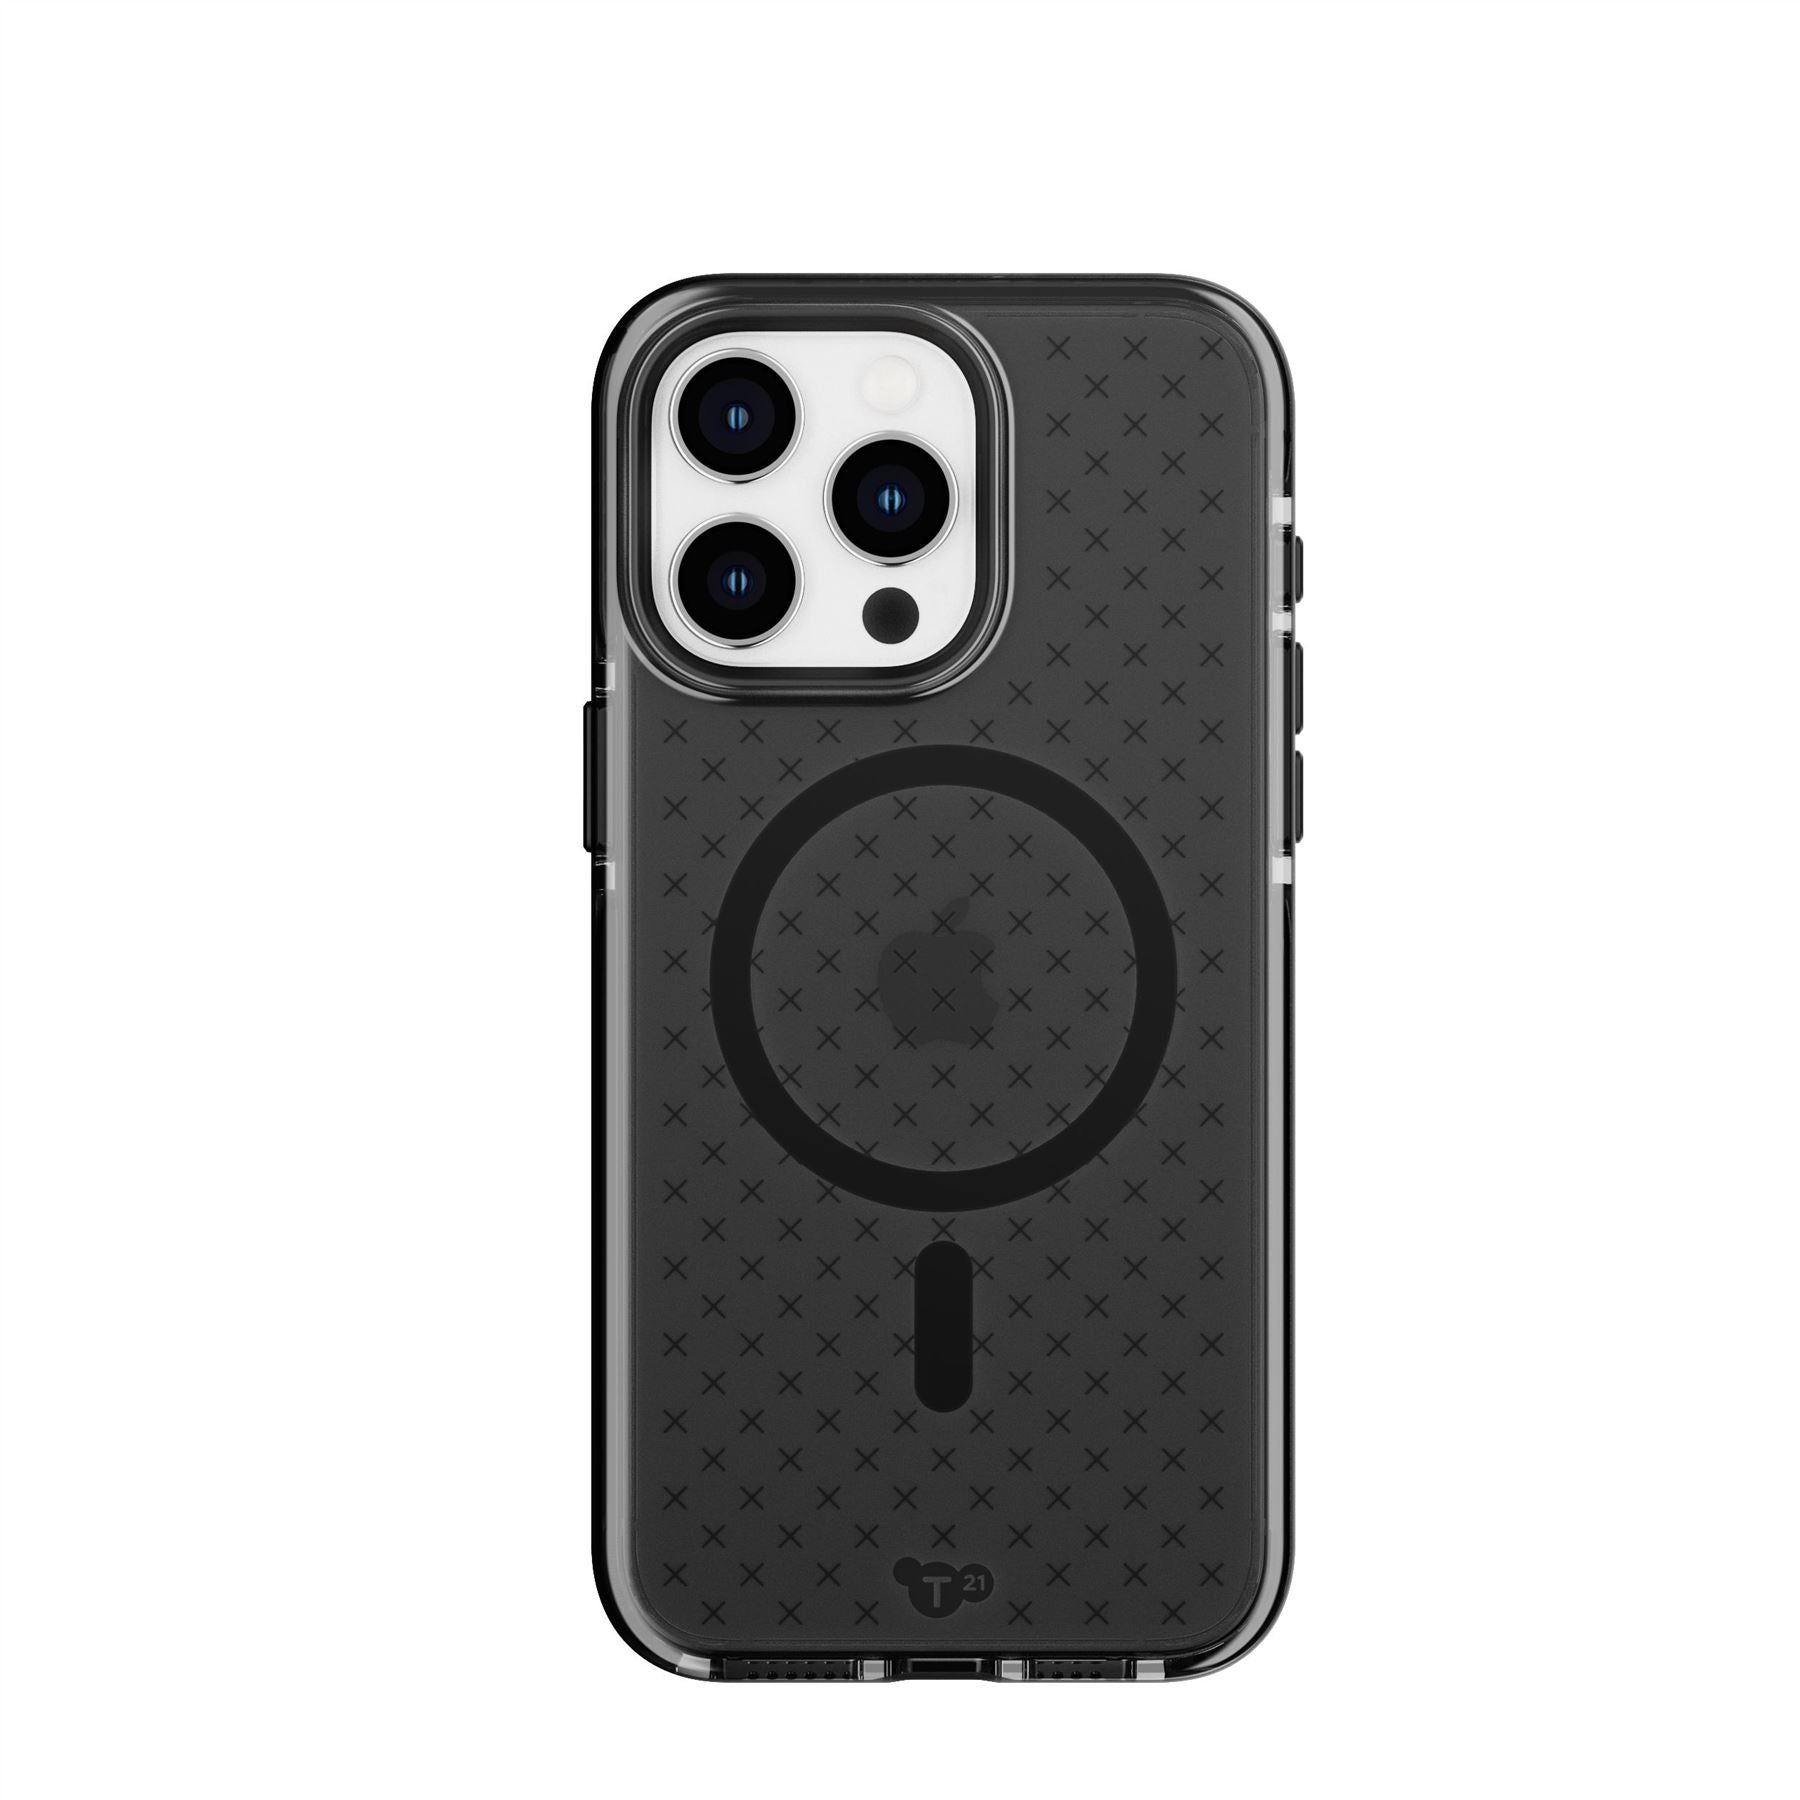 Spigen is Applicable To The New Military Level Fall Proof Full Case Of  iPhone 12 13 14 Pro Max Series For 15 Pro max Series Case